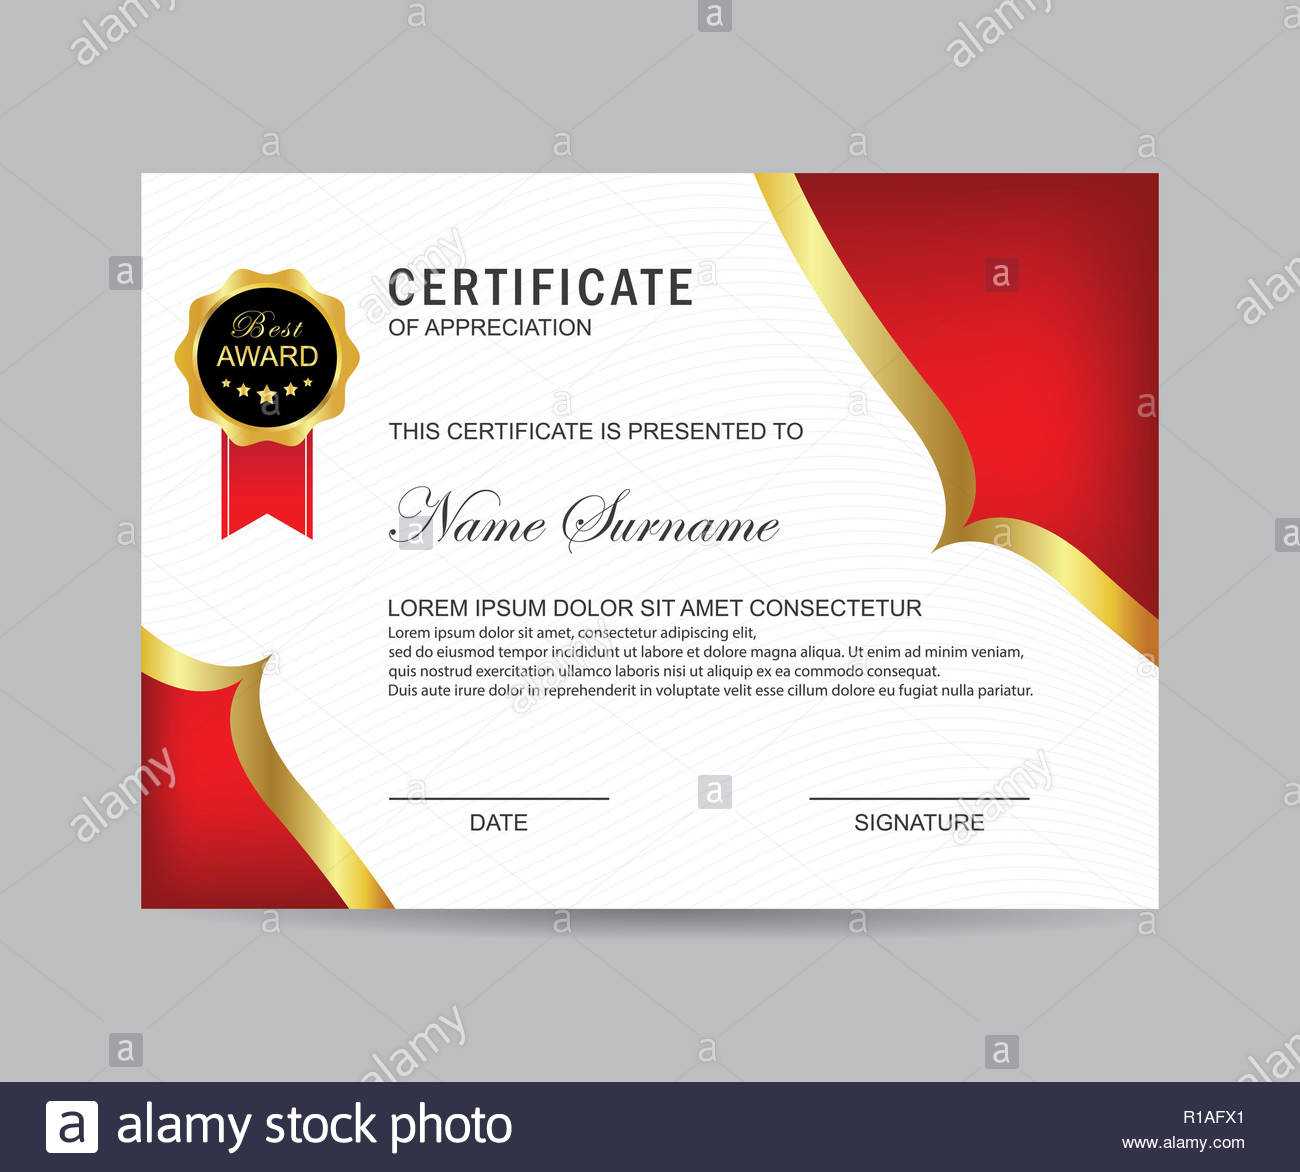 Modern Certificate Template And Background Stock Photo Throughout Life Saving Award Certificate Template